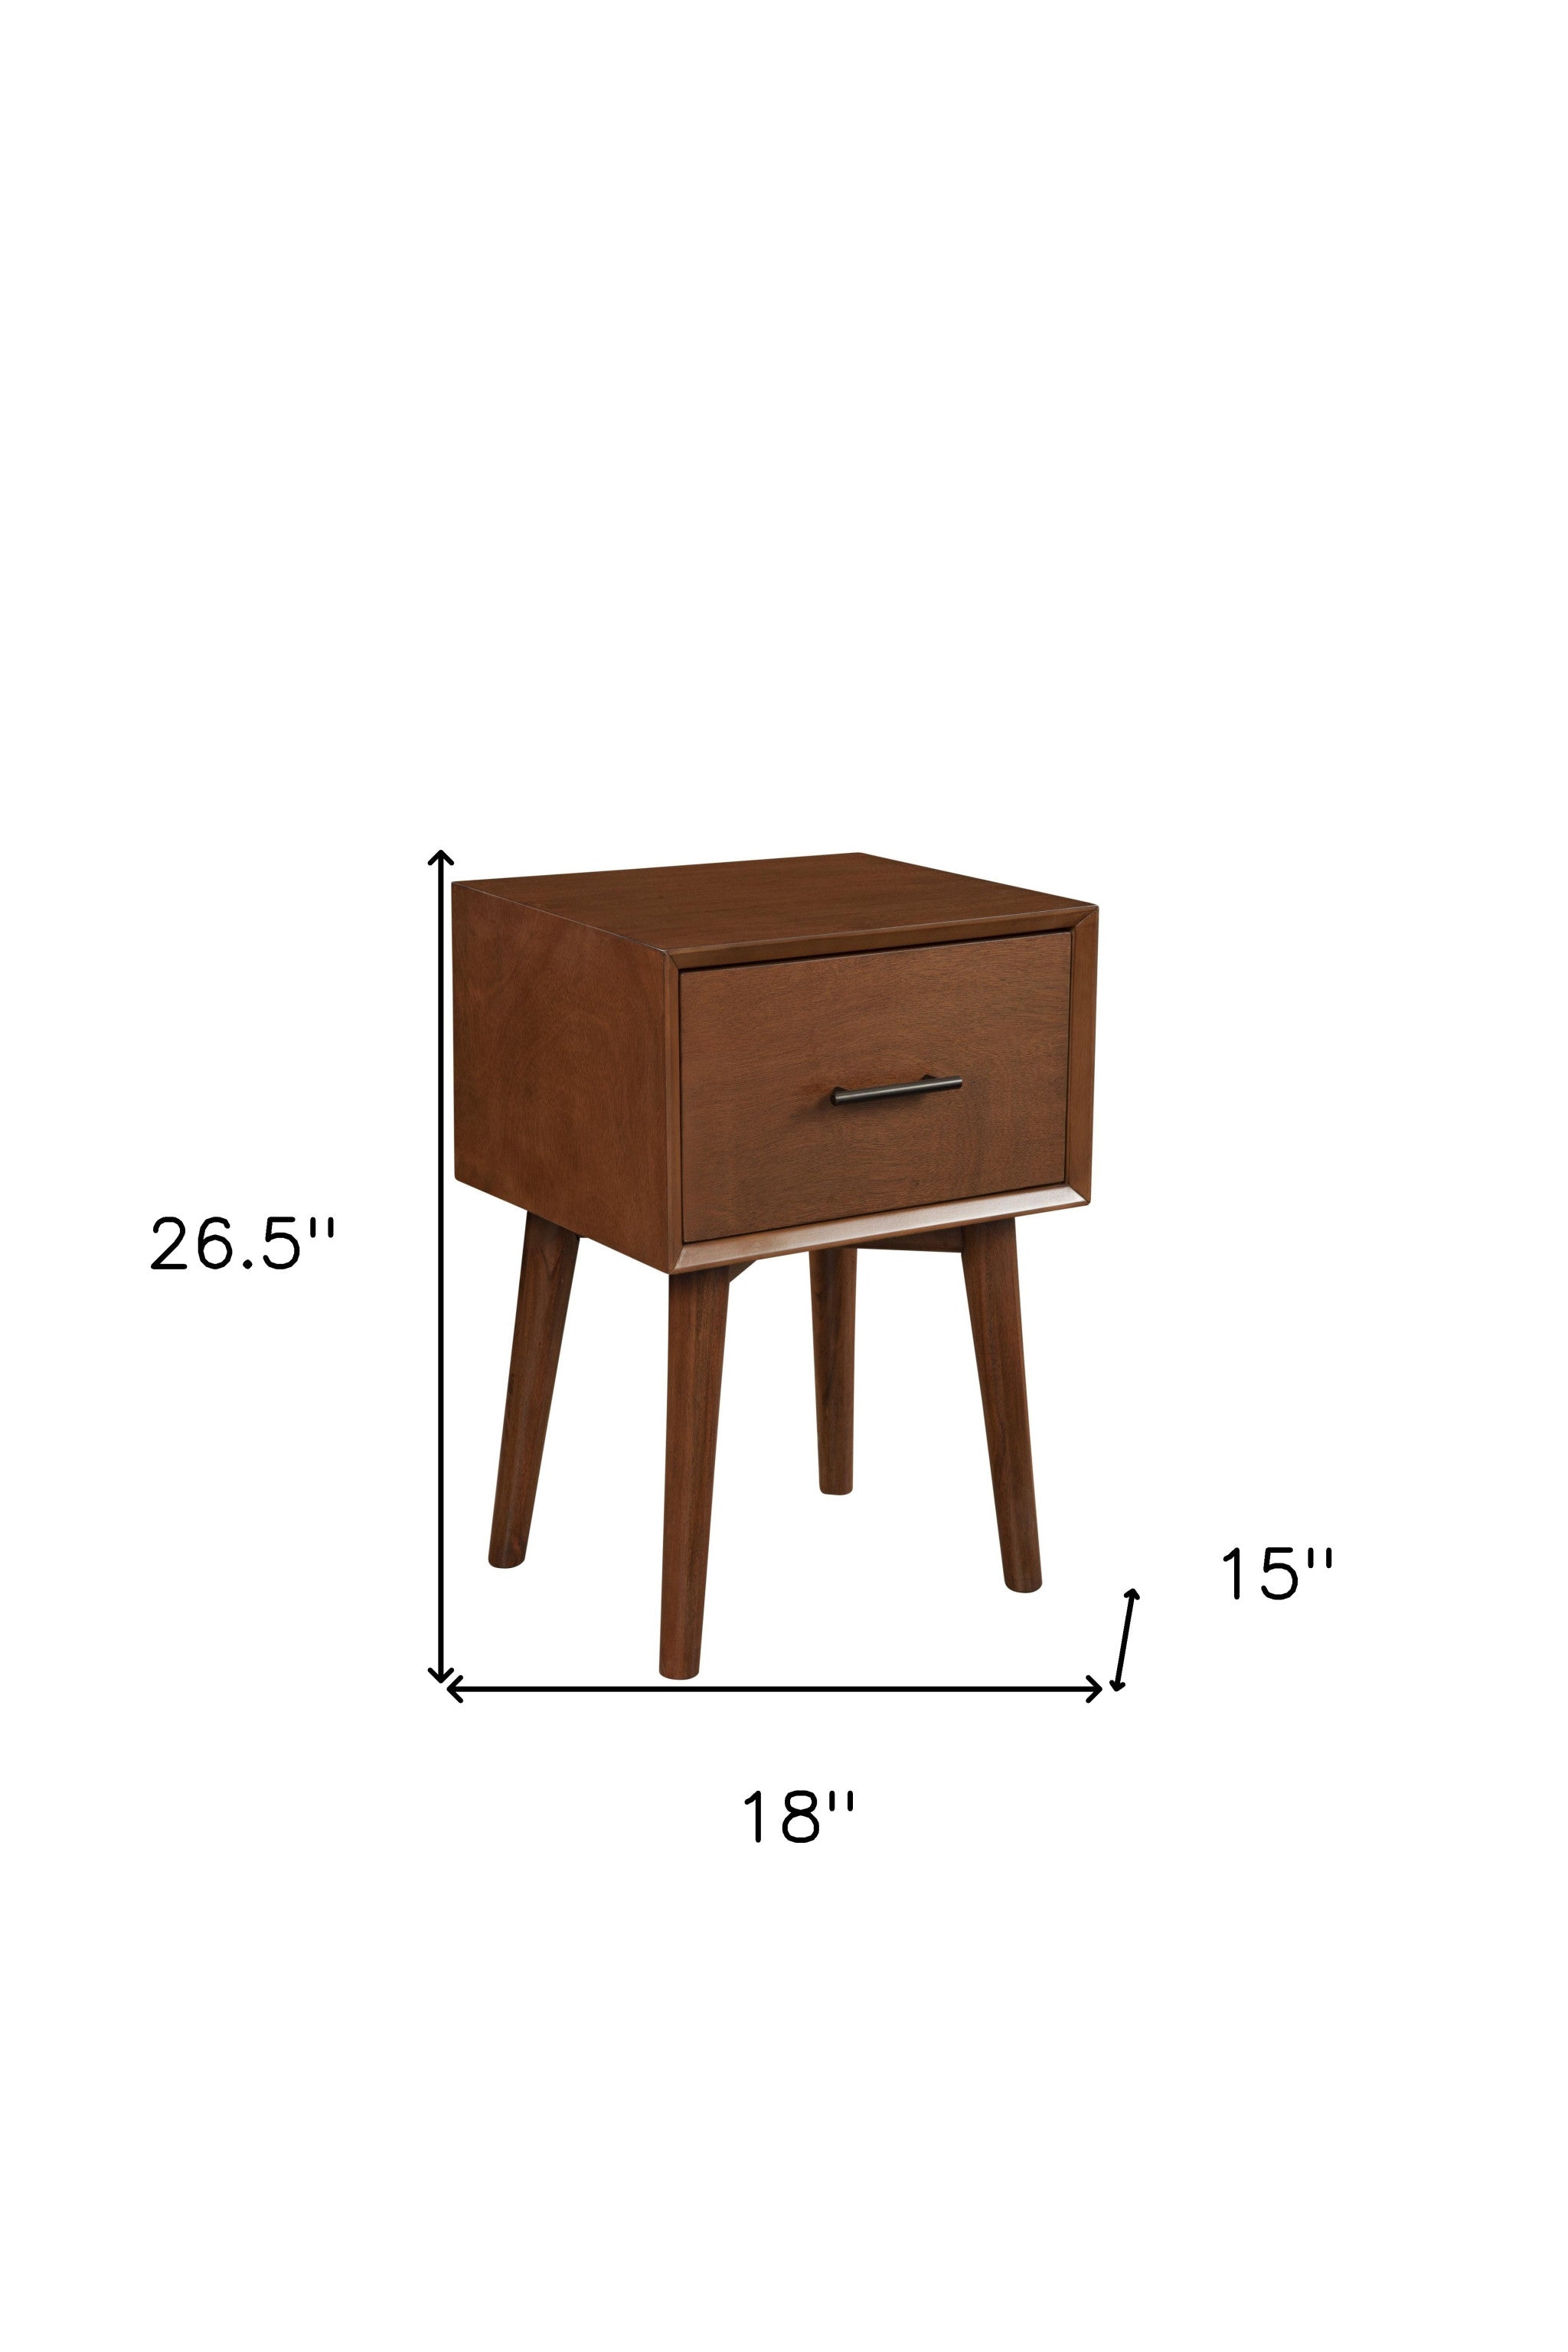 27" Brown Wood End Table With Drawer